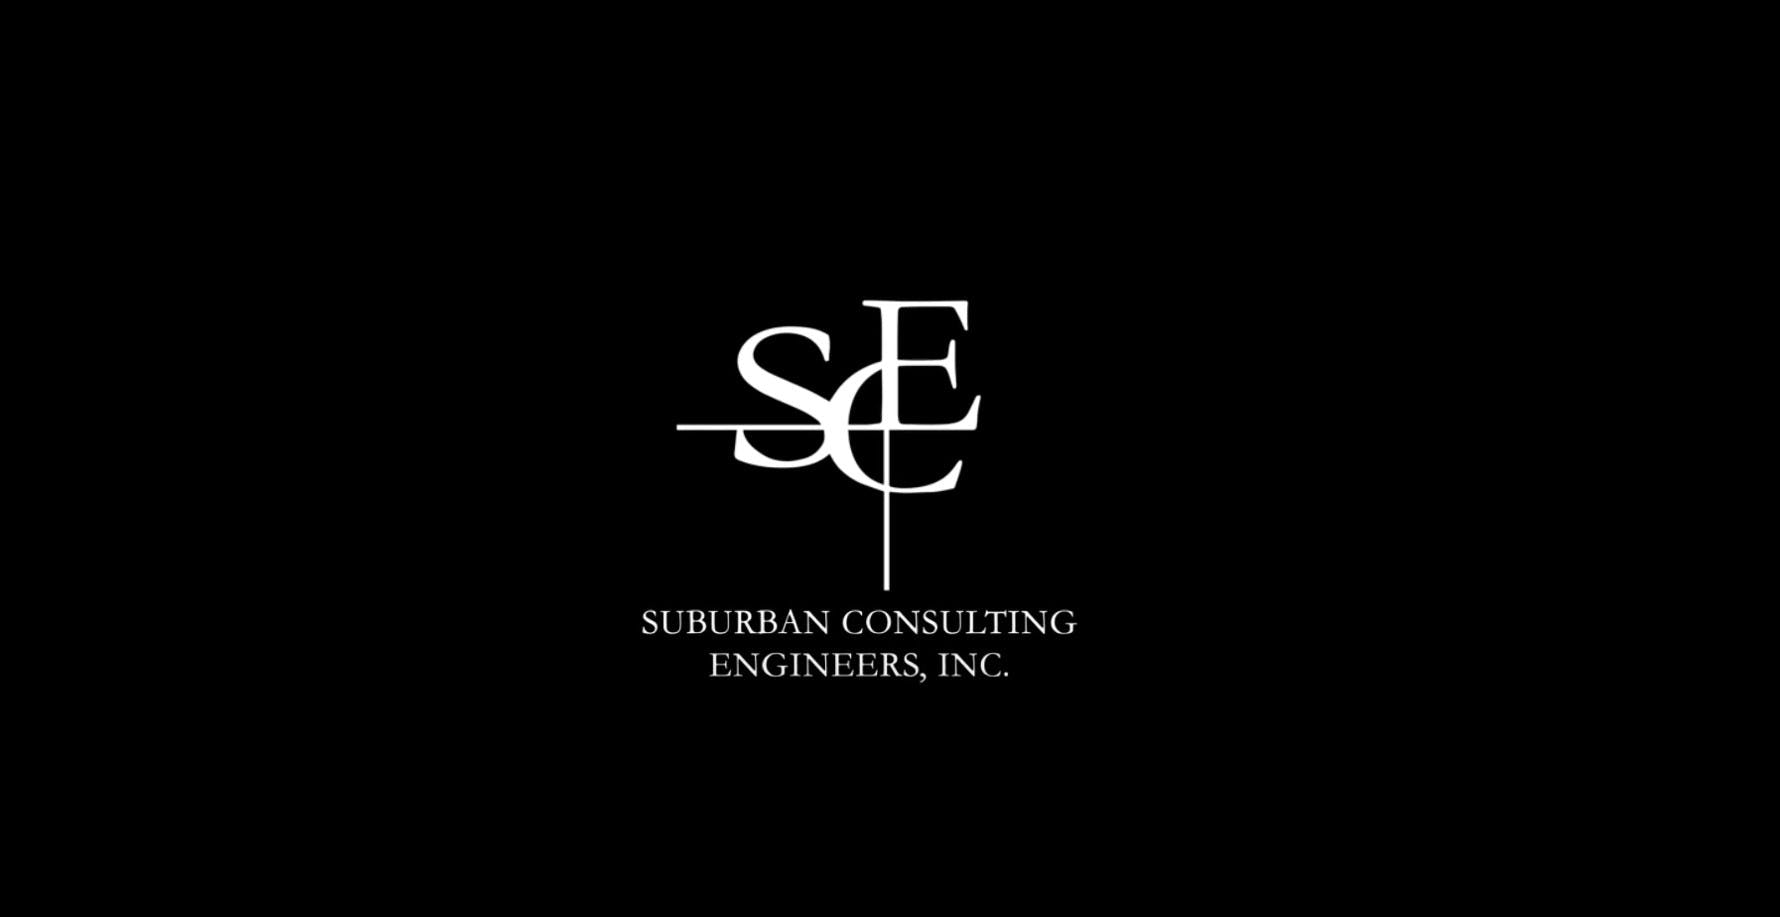 Black background with white Suburban Consulting Engineers logo 